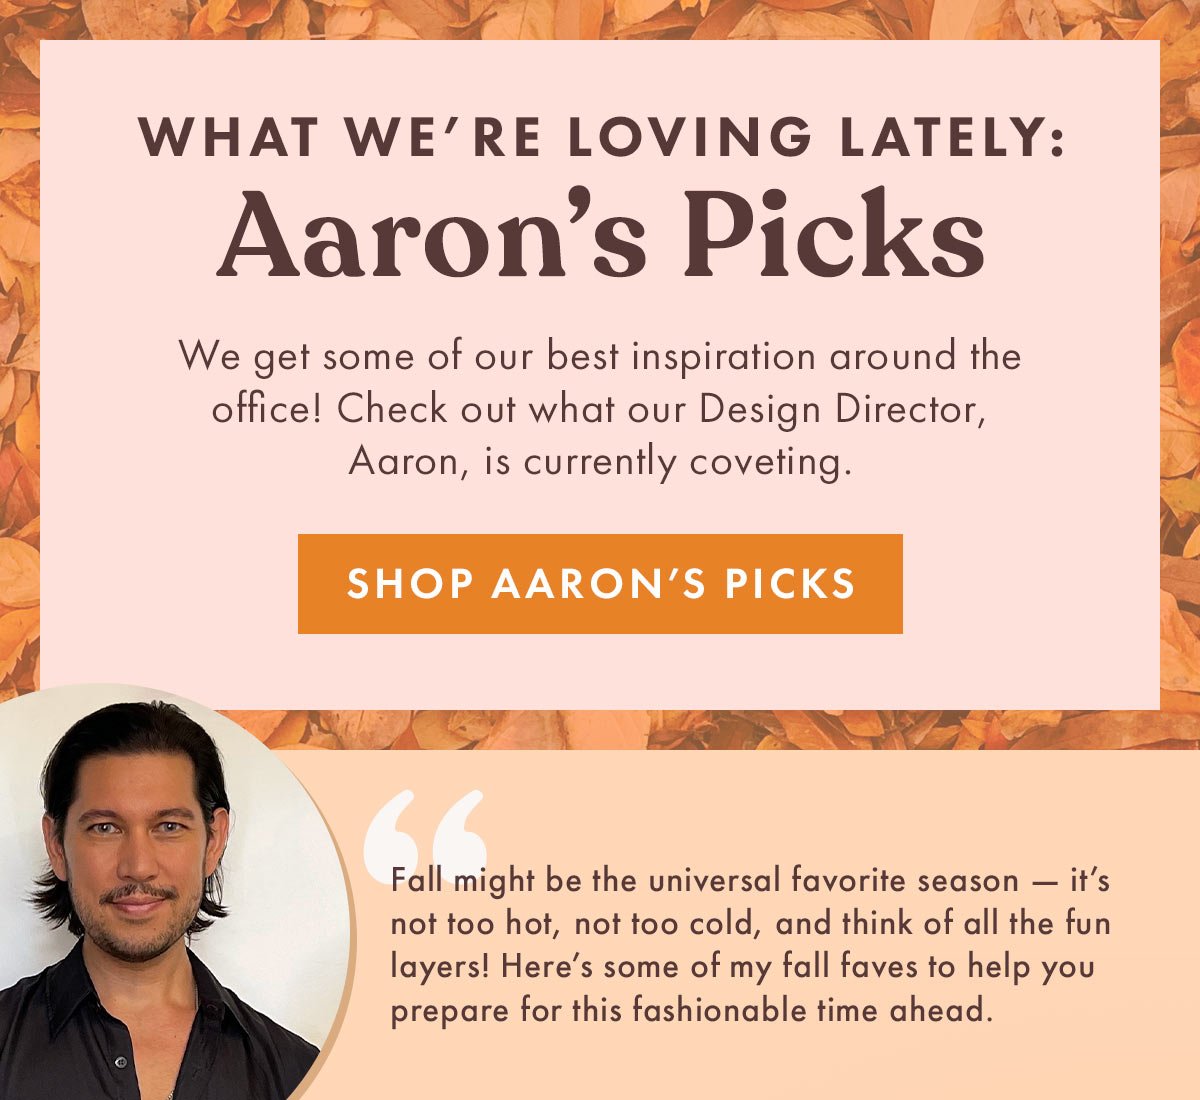 What We're Loving Lately: Aaron's Picks